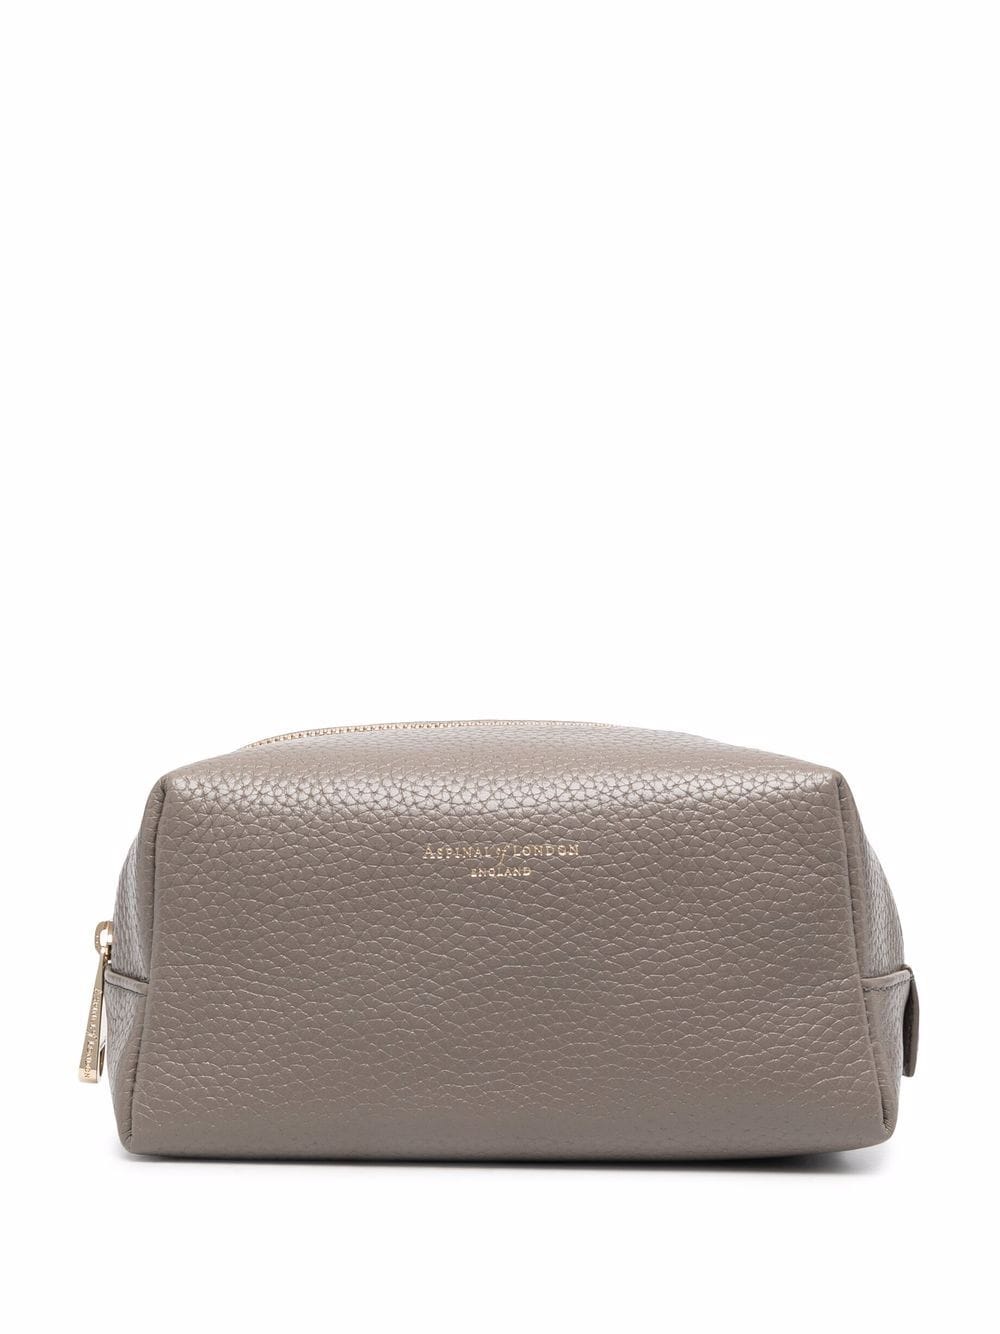 Shop Aspinal Of London pebble leather make up case with Express ...